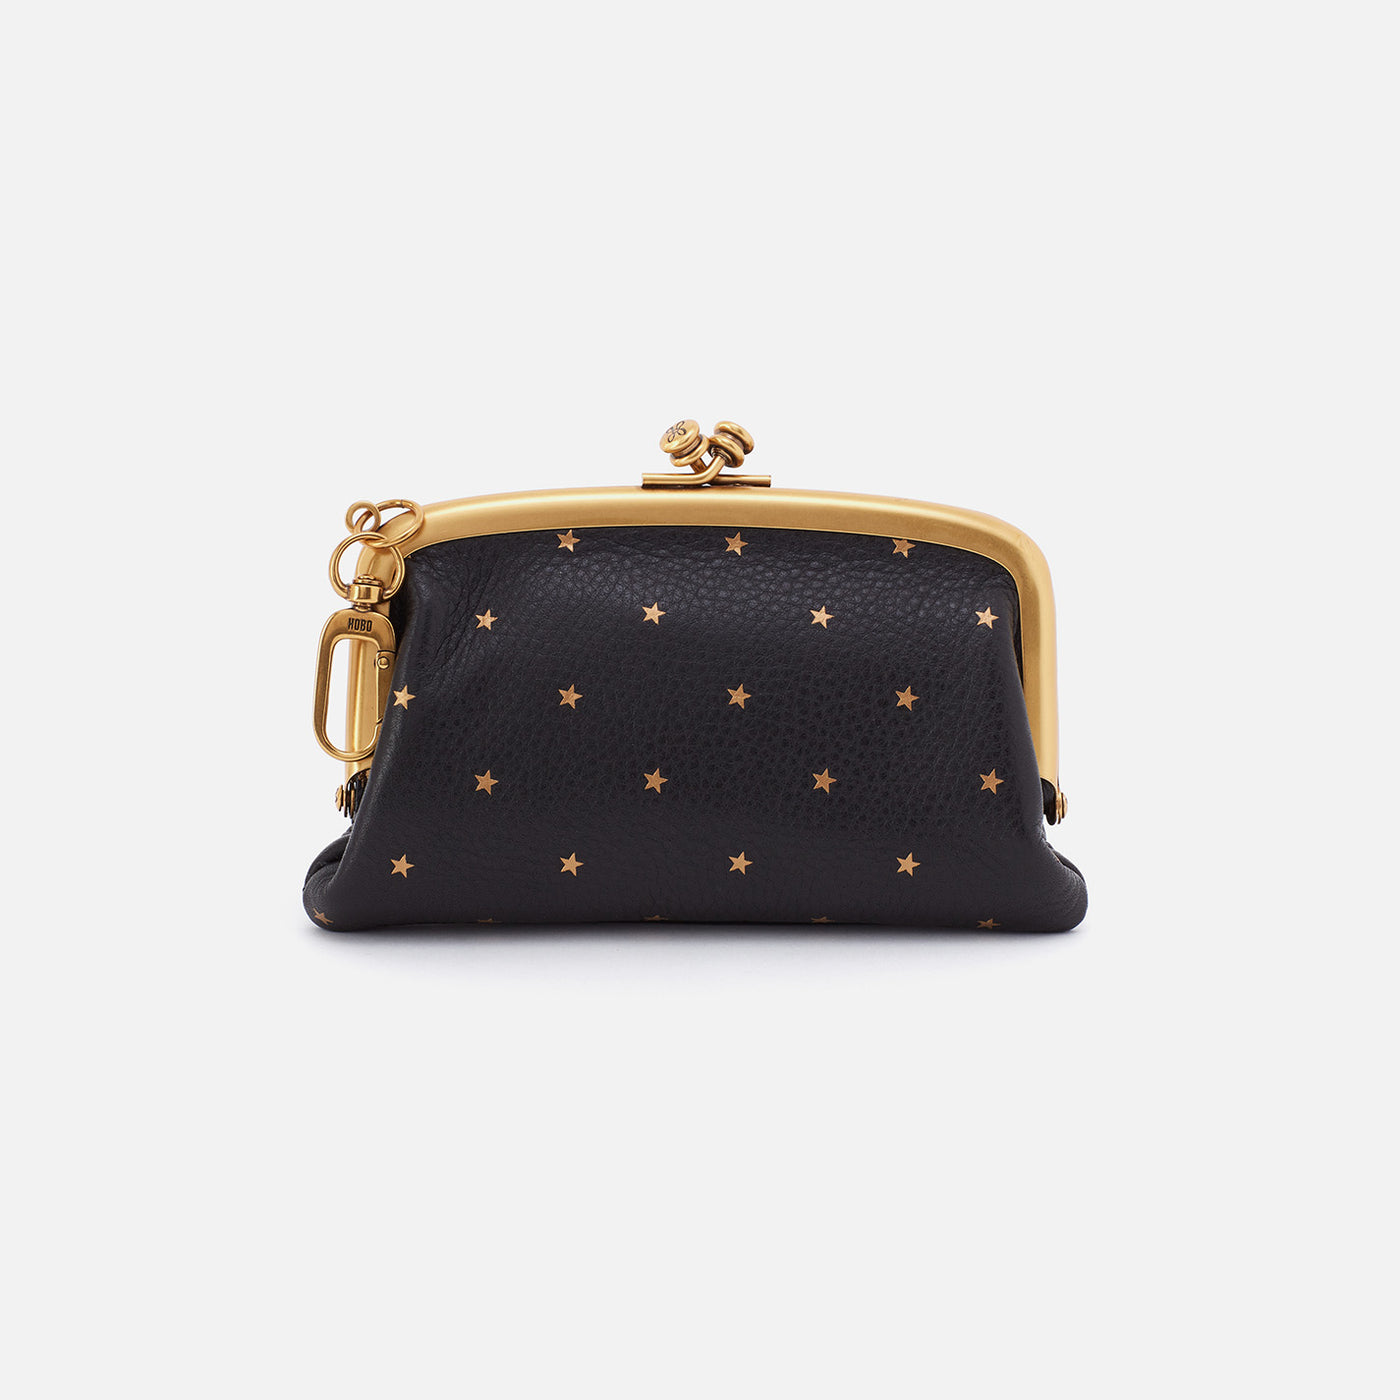 Cheer Bag Charm in Pebbled Leather - Black and Gold Stars